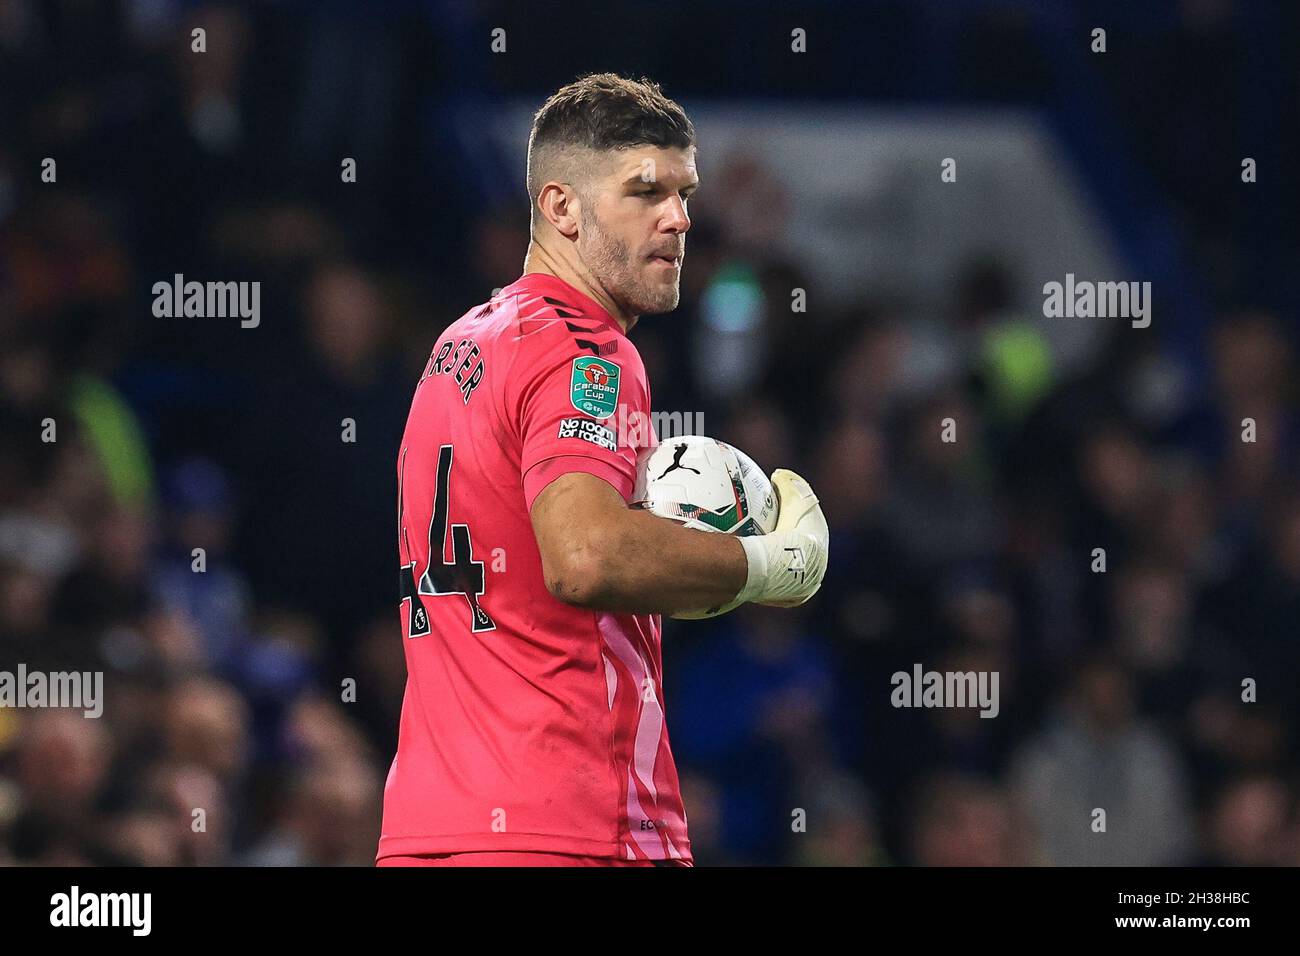 Fraser Forster #44 of Southampton during the game in, on 10/26/2021. (Photo by Mark Cosgrove/News Images/Sipa USA) Credit: Sipa USA/Alamy Live News Stock Photo